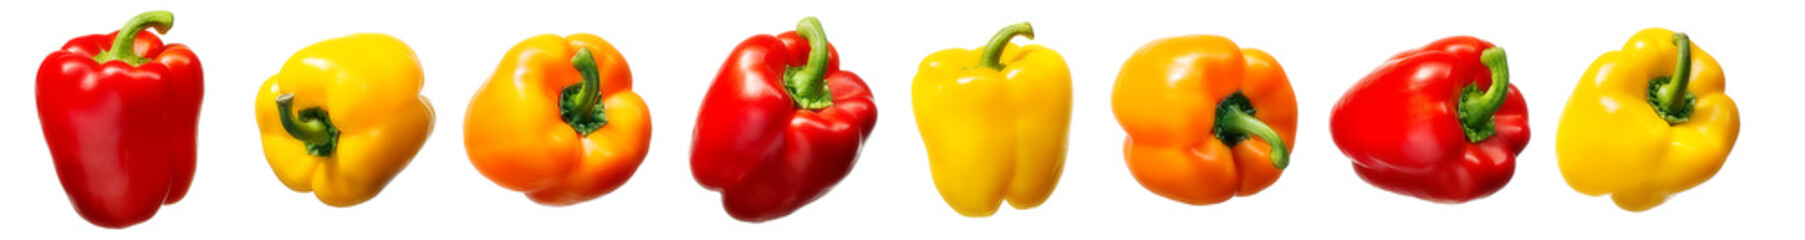 Group of sweet red and yellow pepper isolated on white background